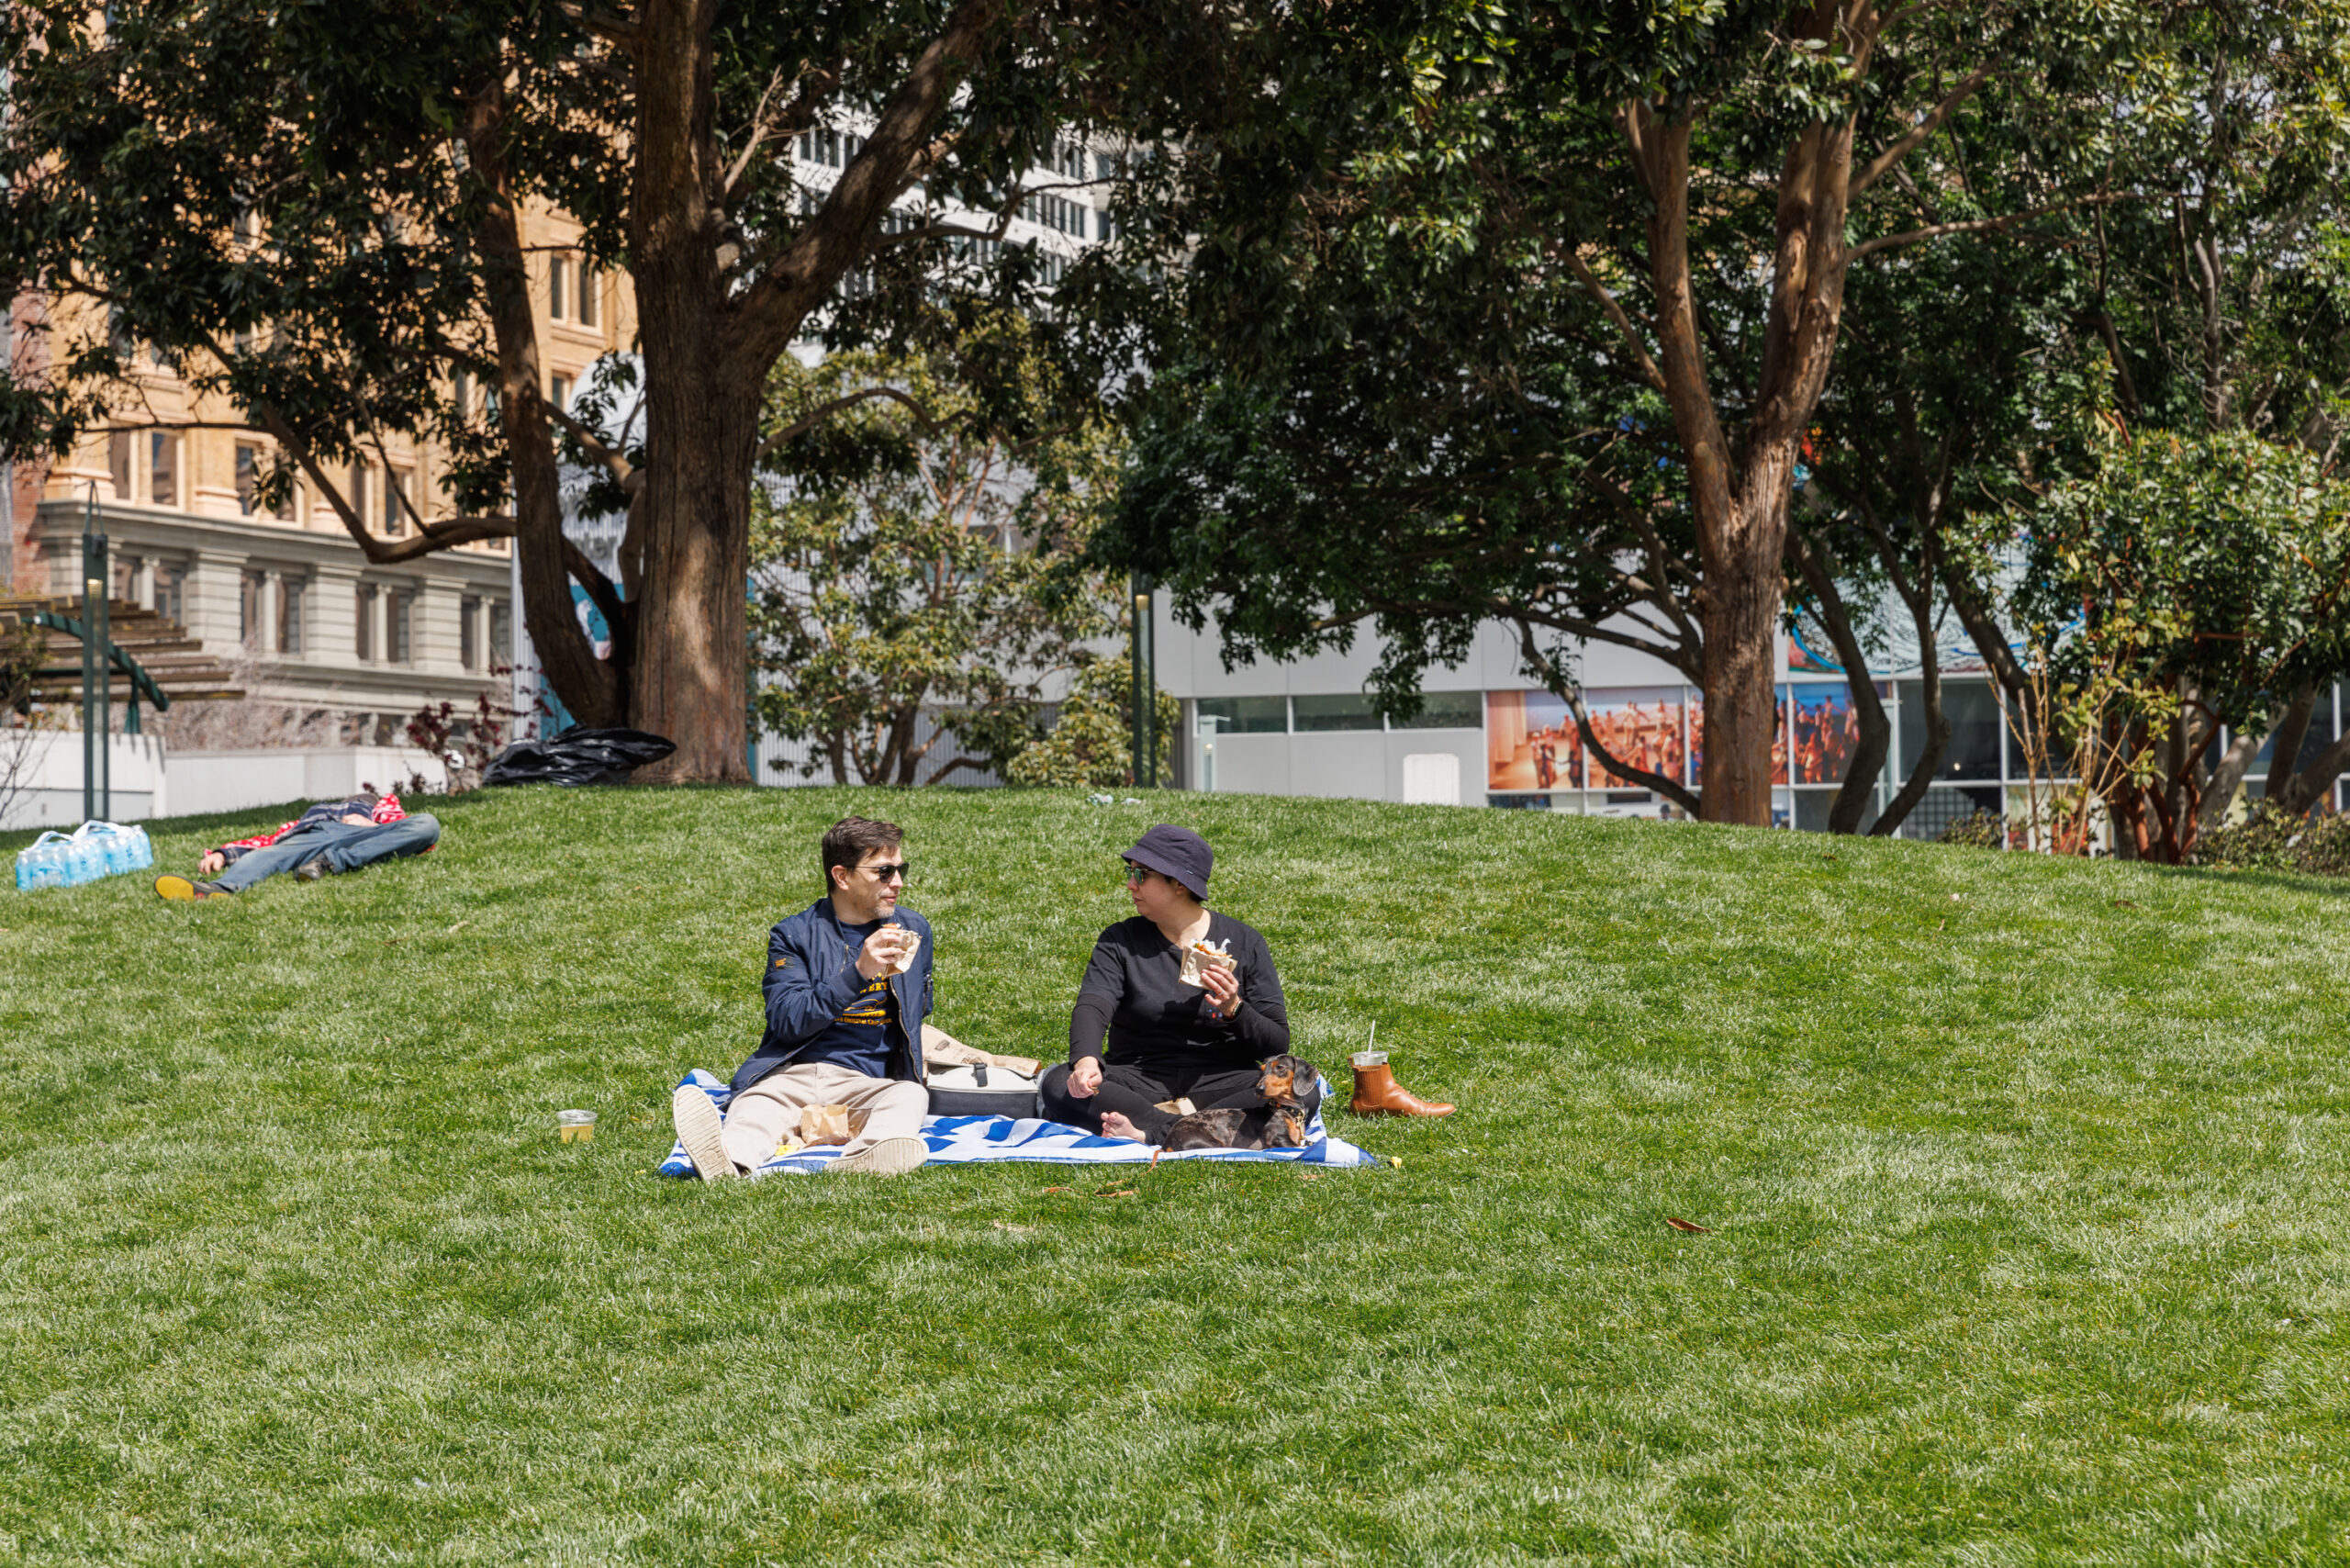 Two people are sitting on a picnic blanket in a grassy park, chatting, with trees and buildings in the background.